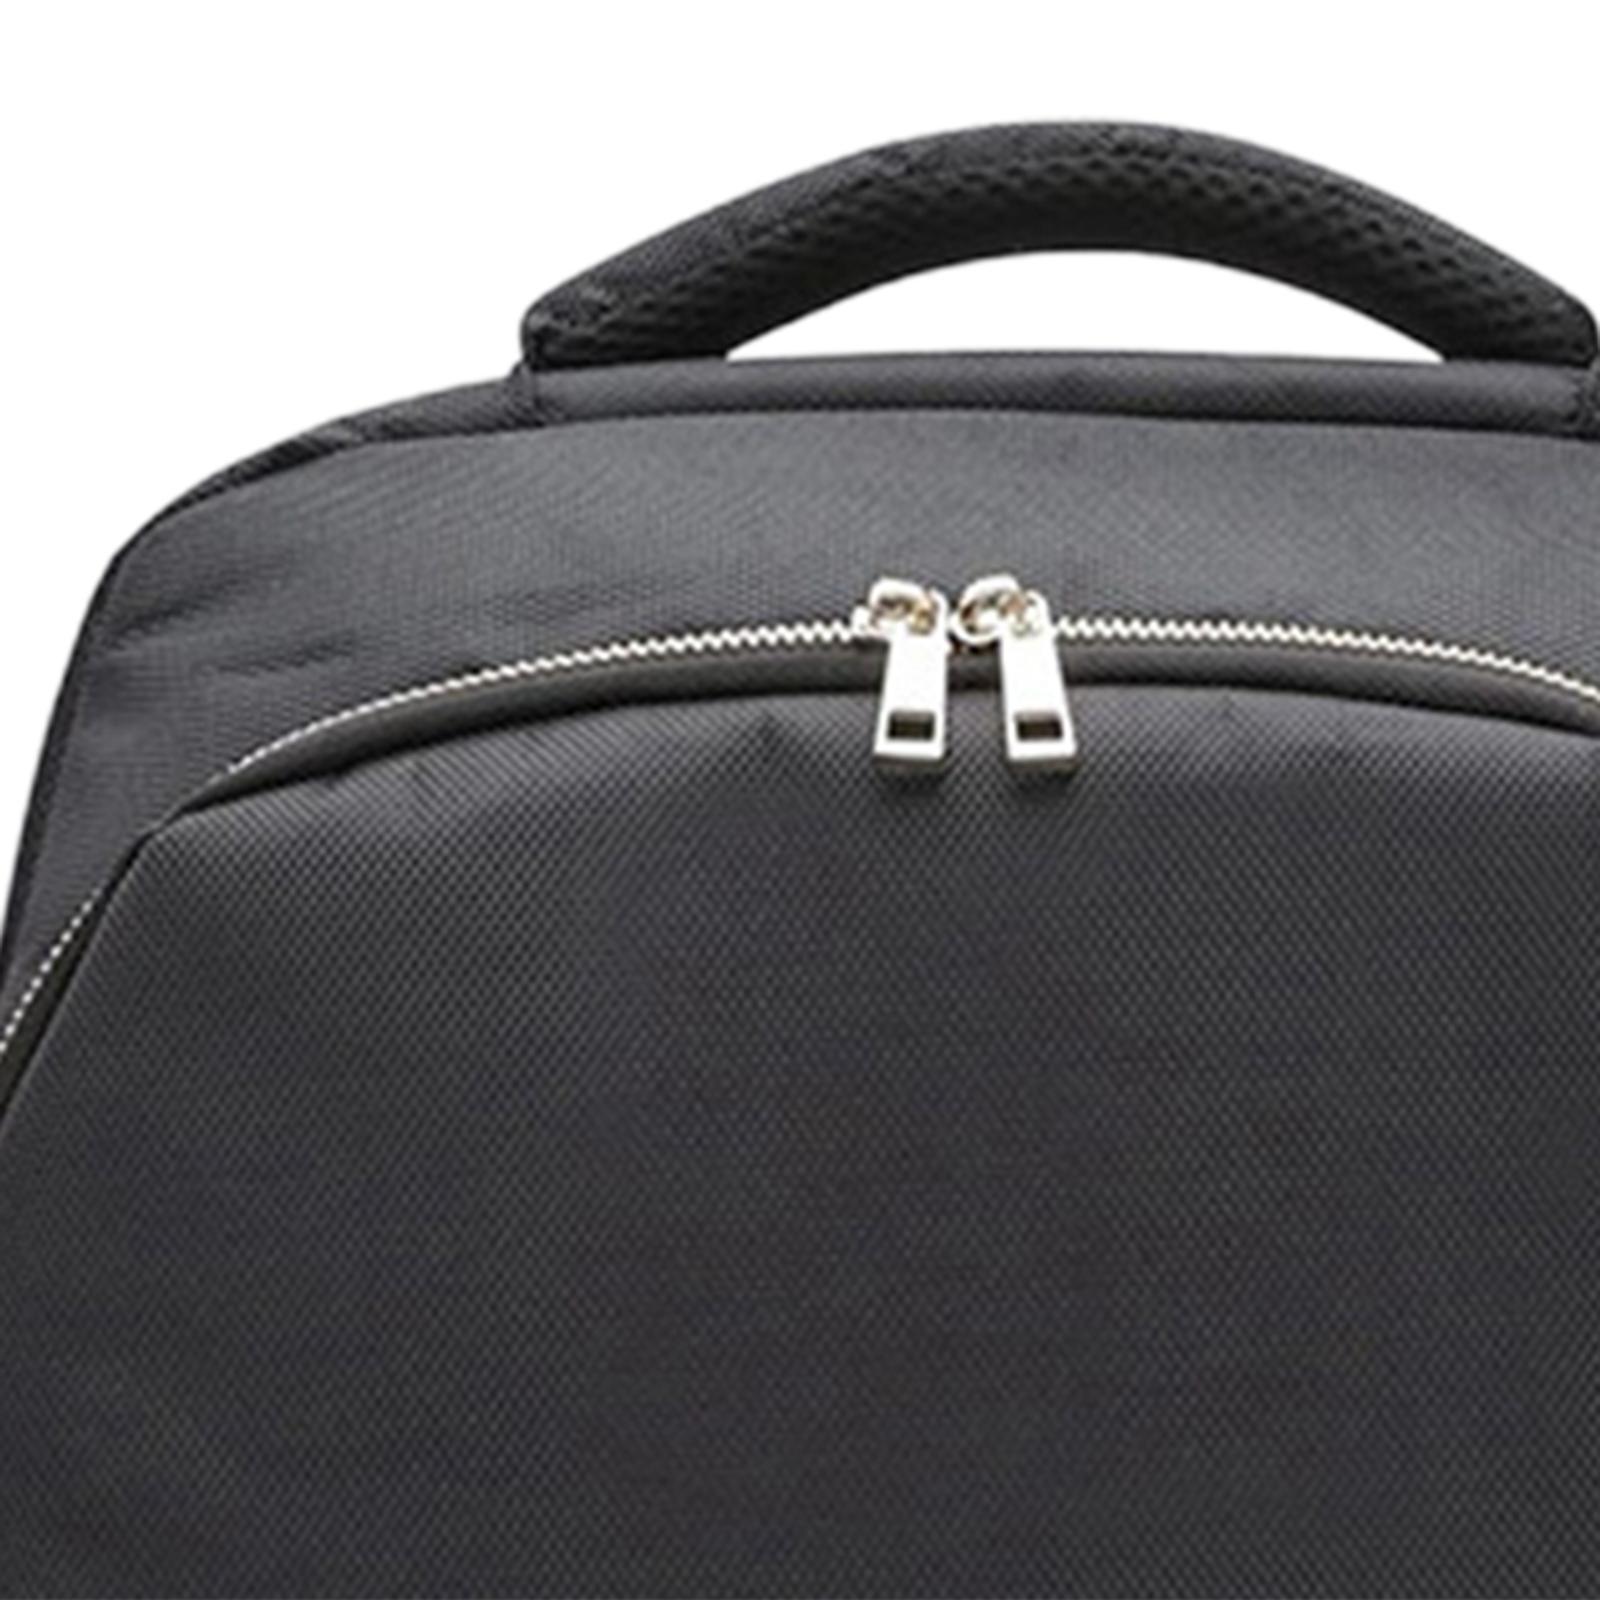 Backpack Bag for Barbers Large Capacity Oxford Cloth for Hairdresser Travel